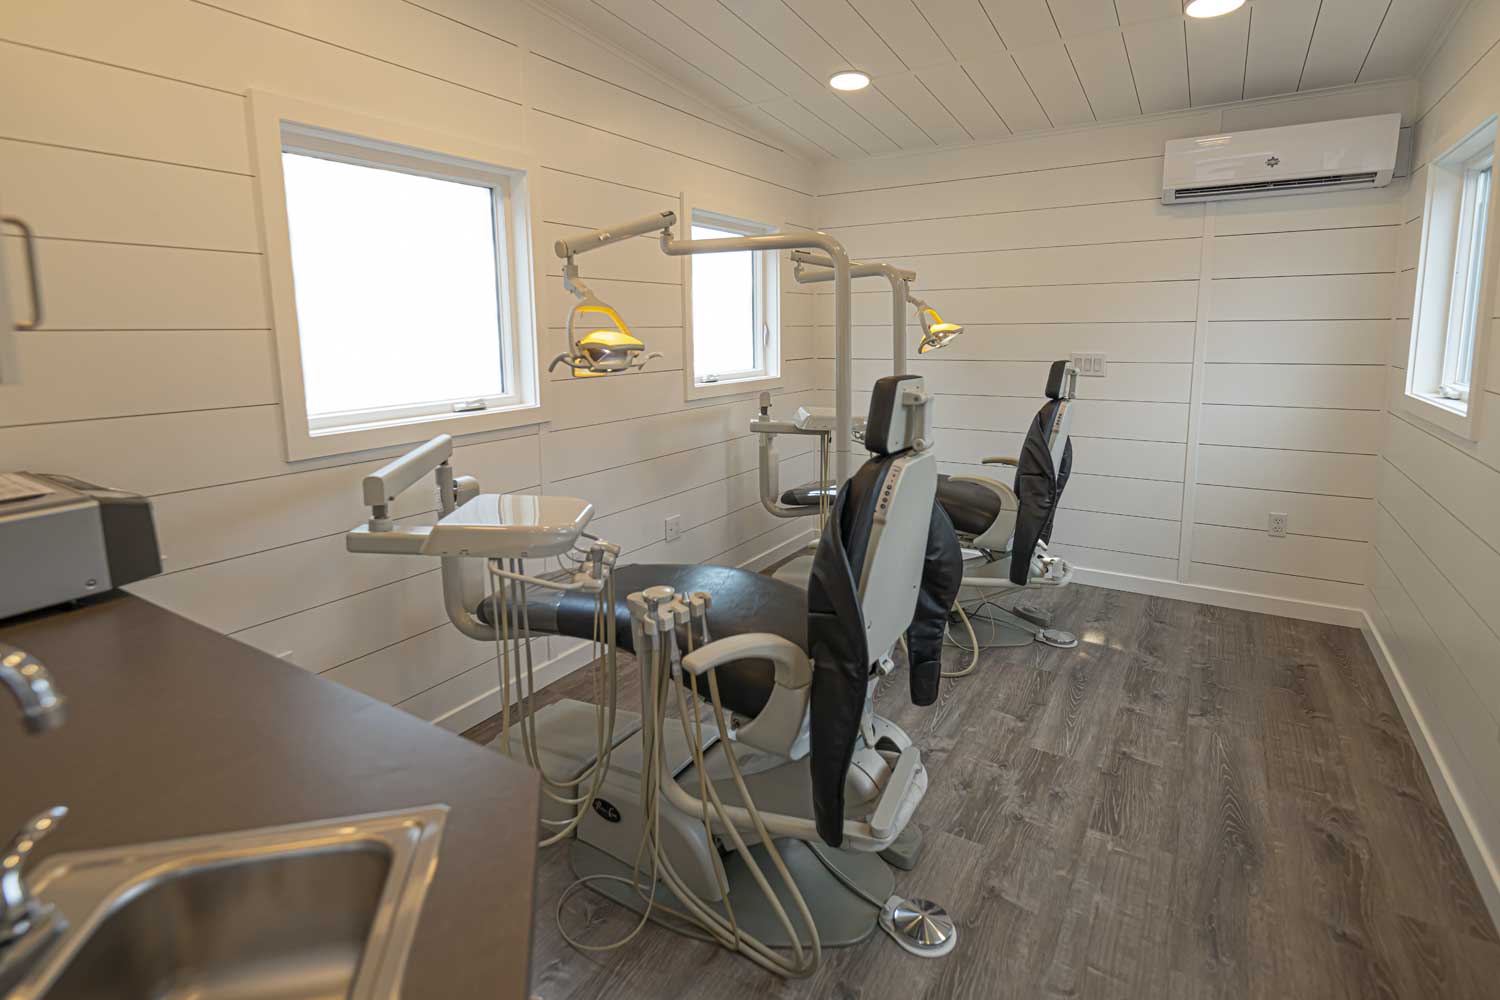 Interior of the Gentle Dental Mobile Dentists office commercial tiny home, showing windows, a mini split heat pump, and dentist chairs and eqiupment